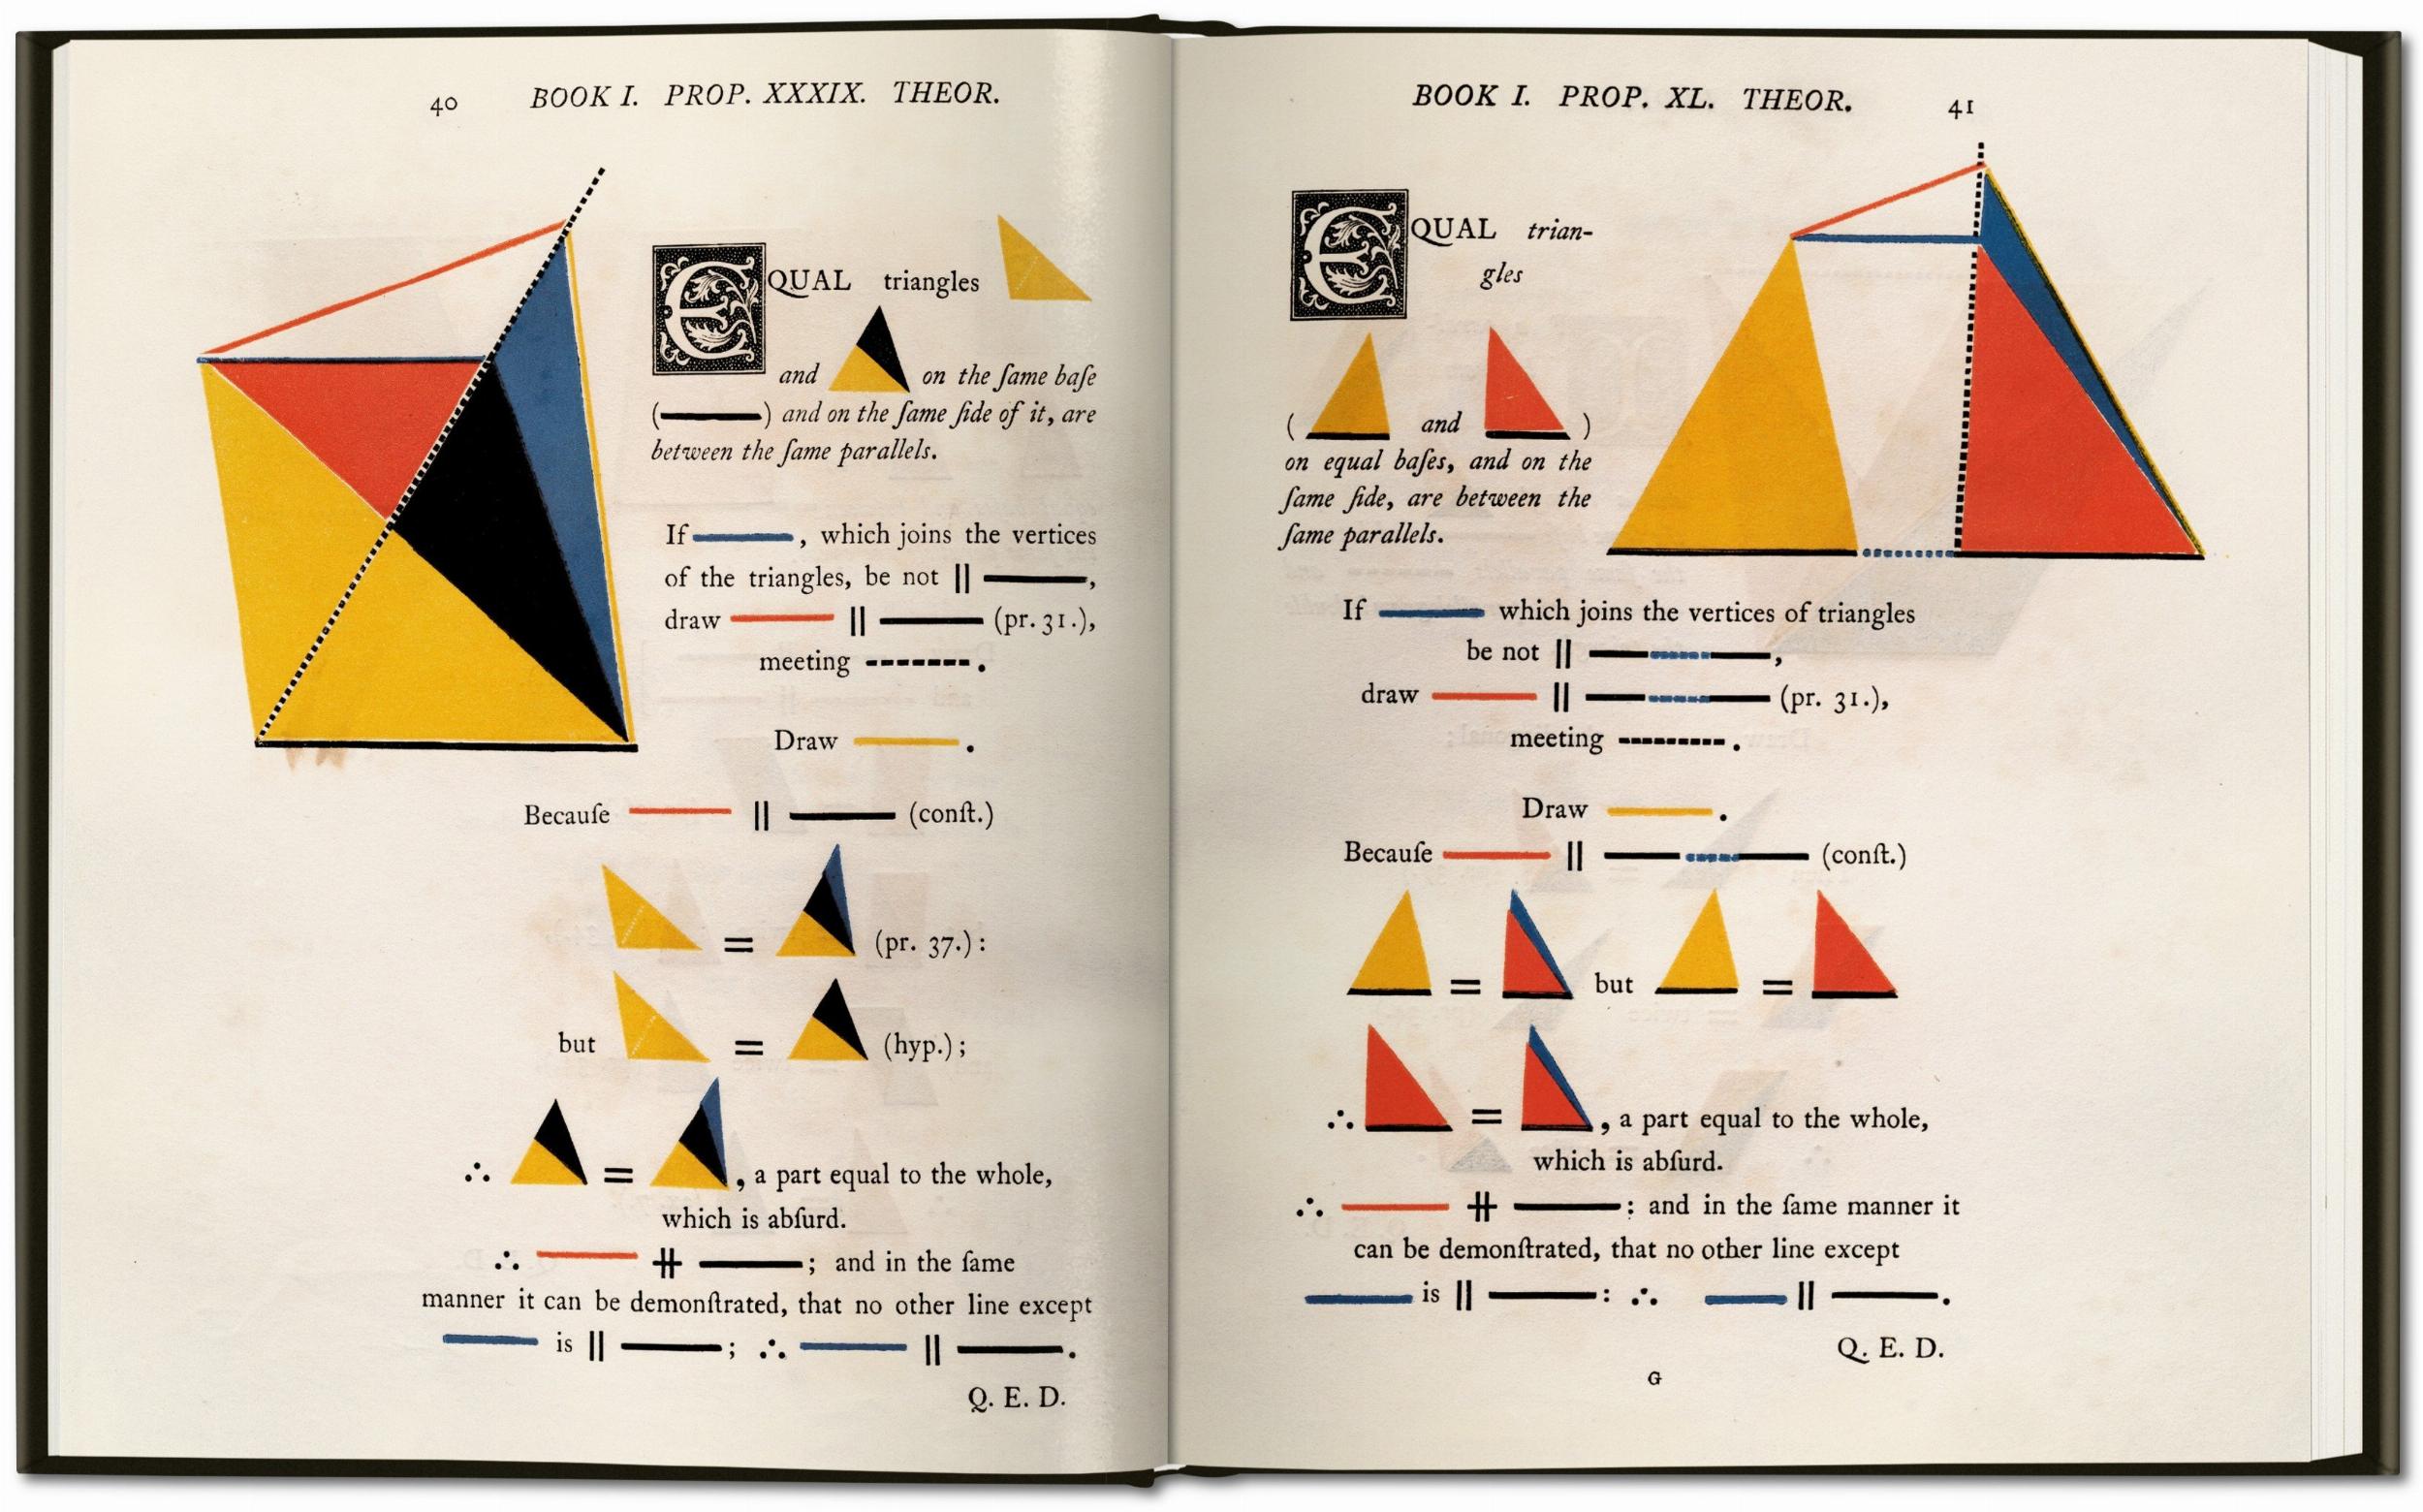 The First Six Books of the Elements of Euclid